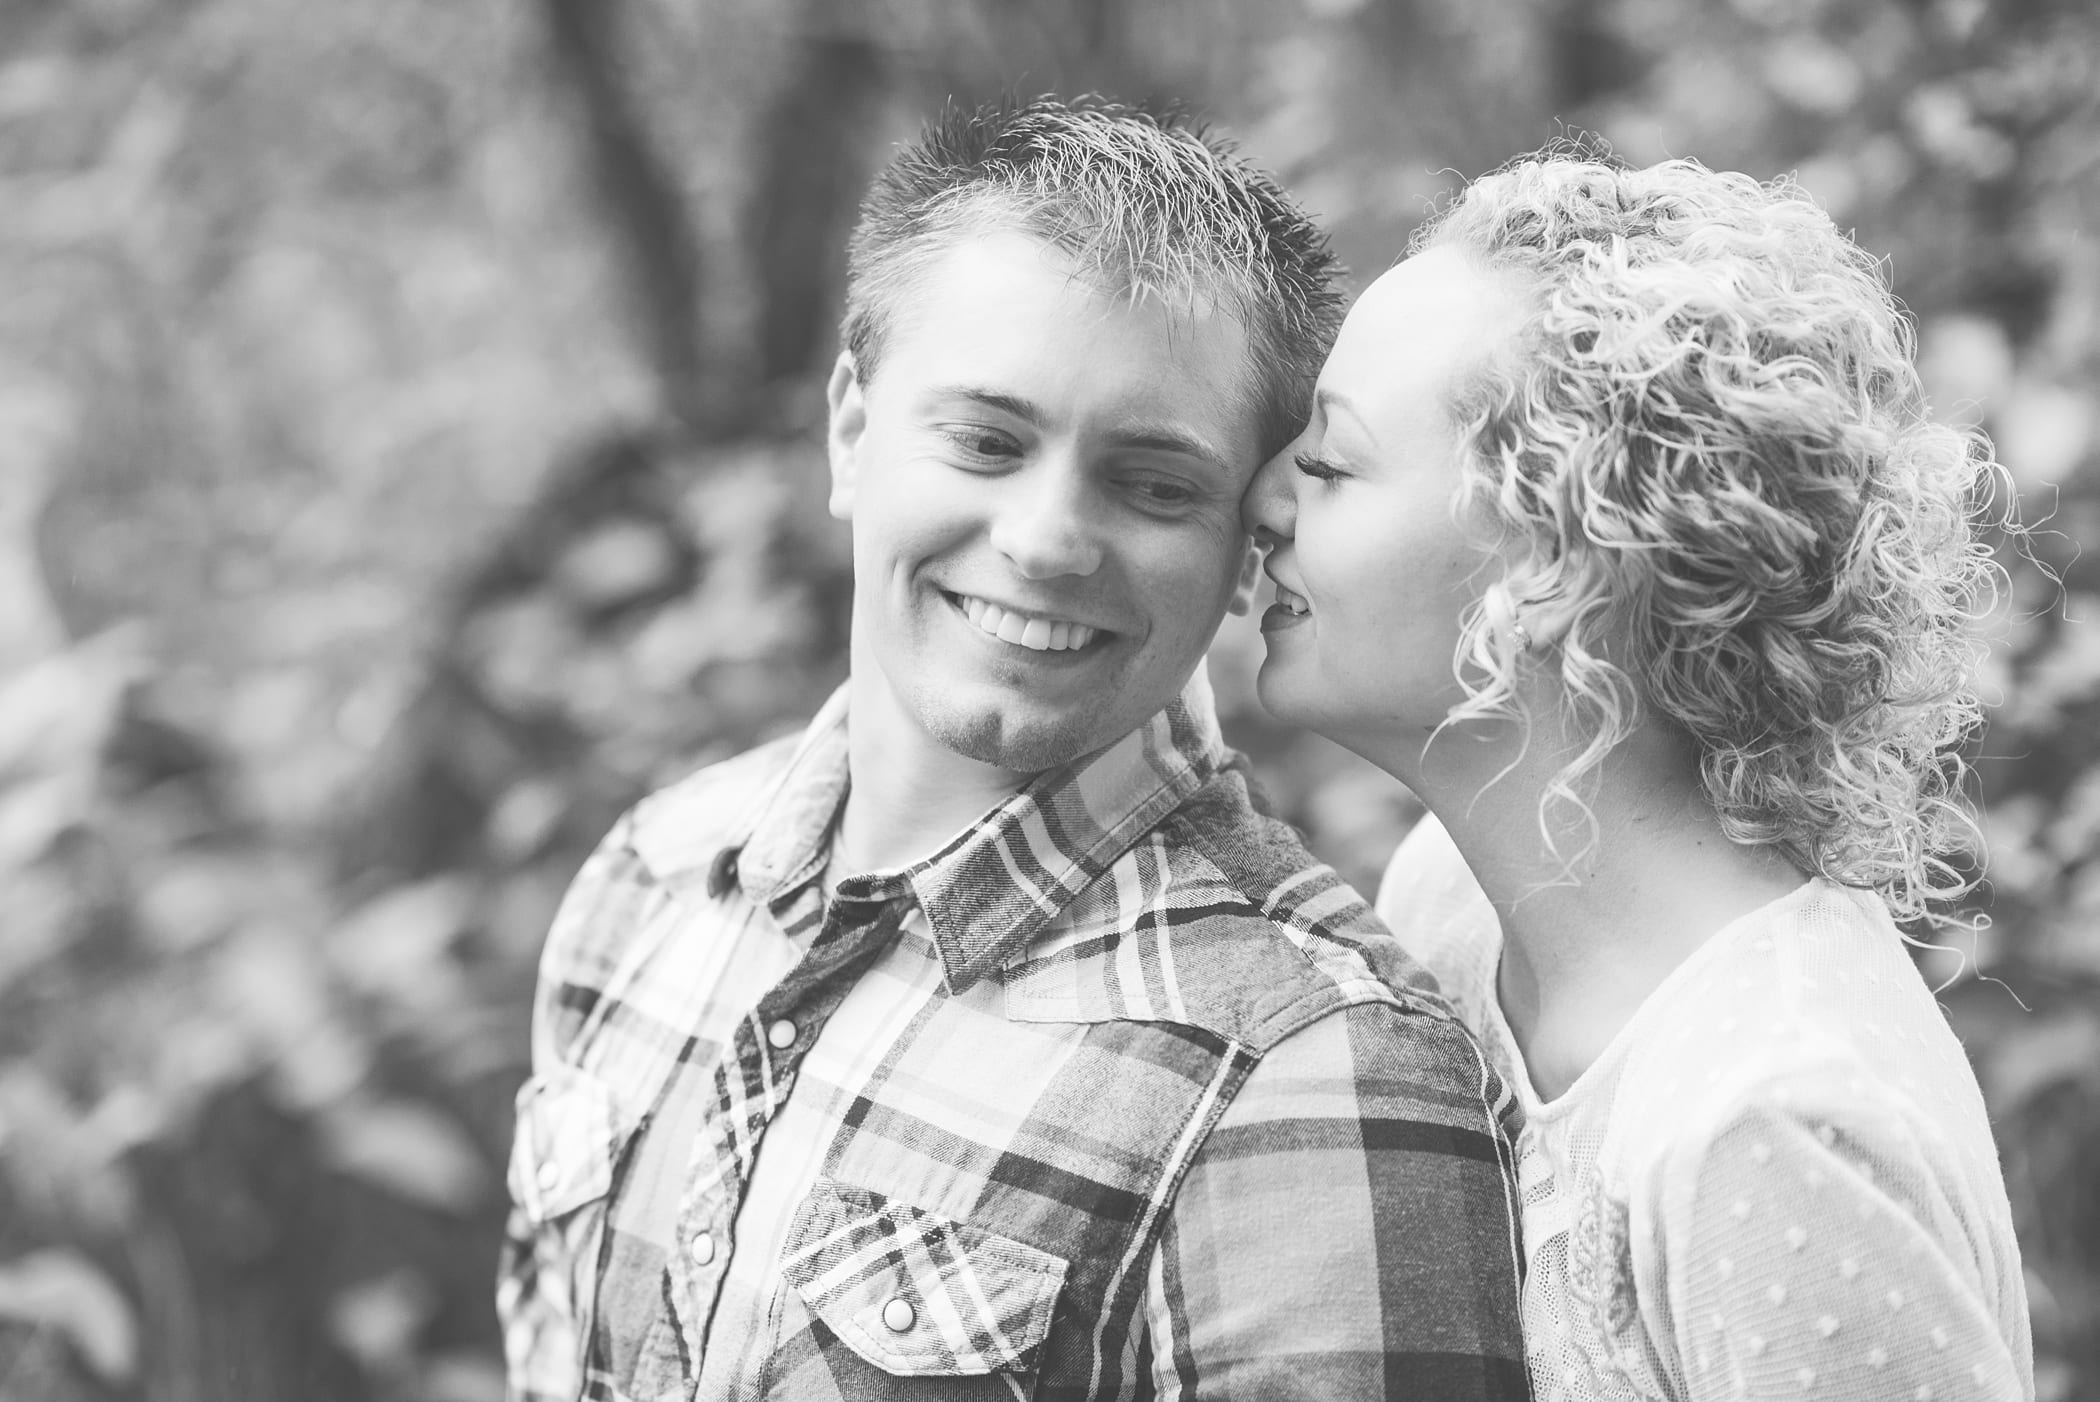 Swan Valley, Idaho Mountain Anniversary Session by Michelle & Logan